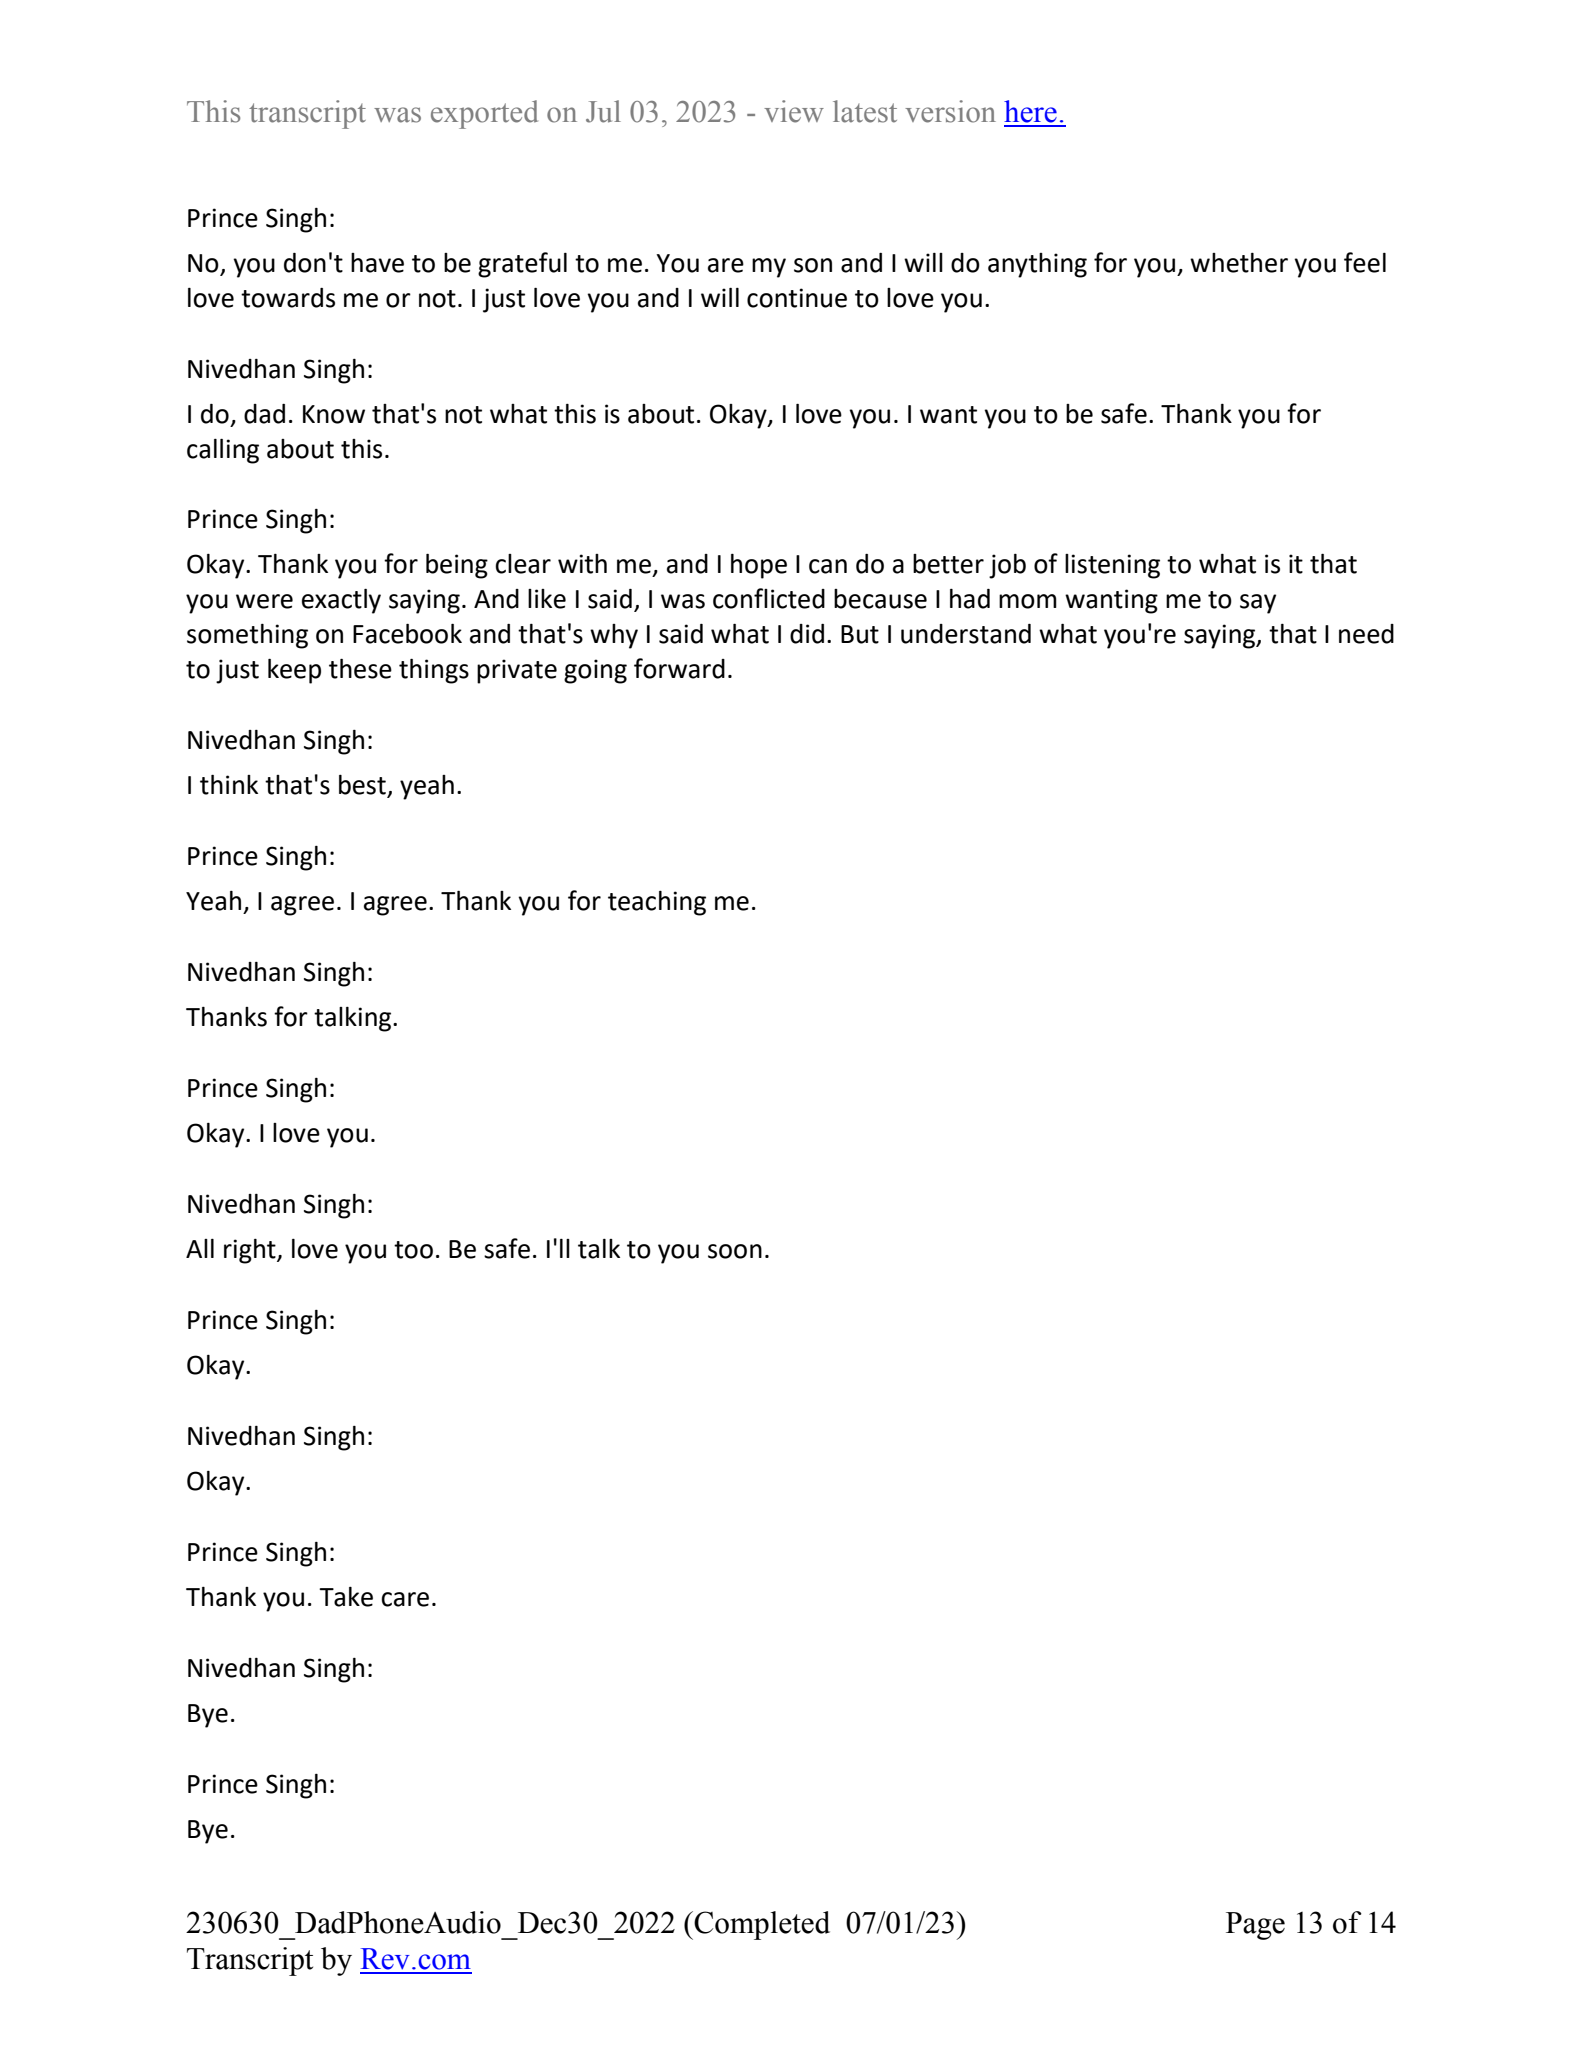 December 30th, 2022 phone call transcript - Page 13